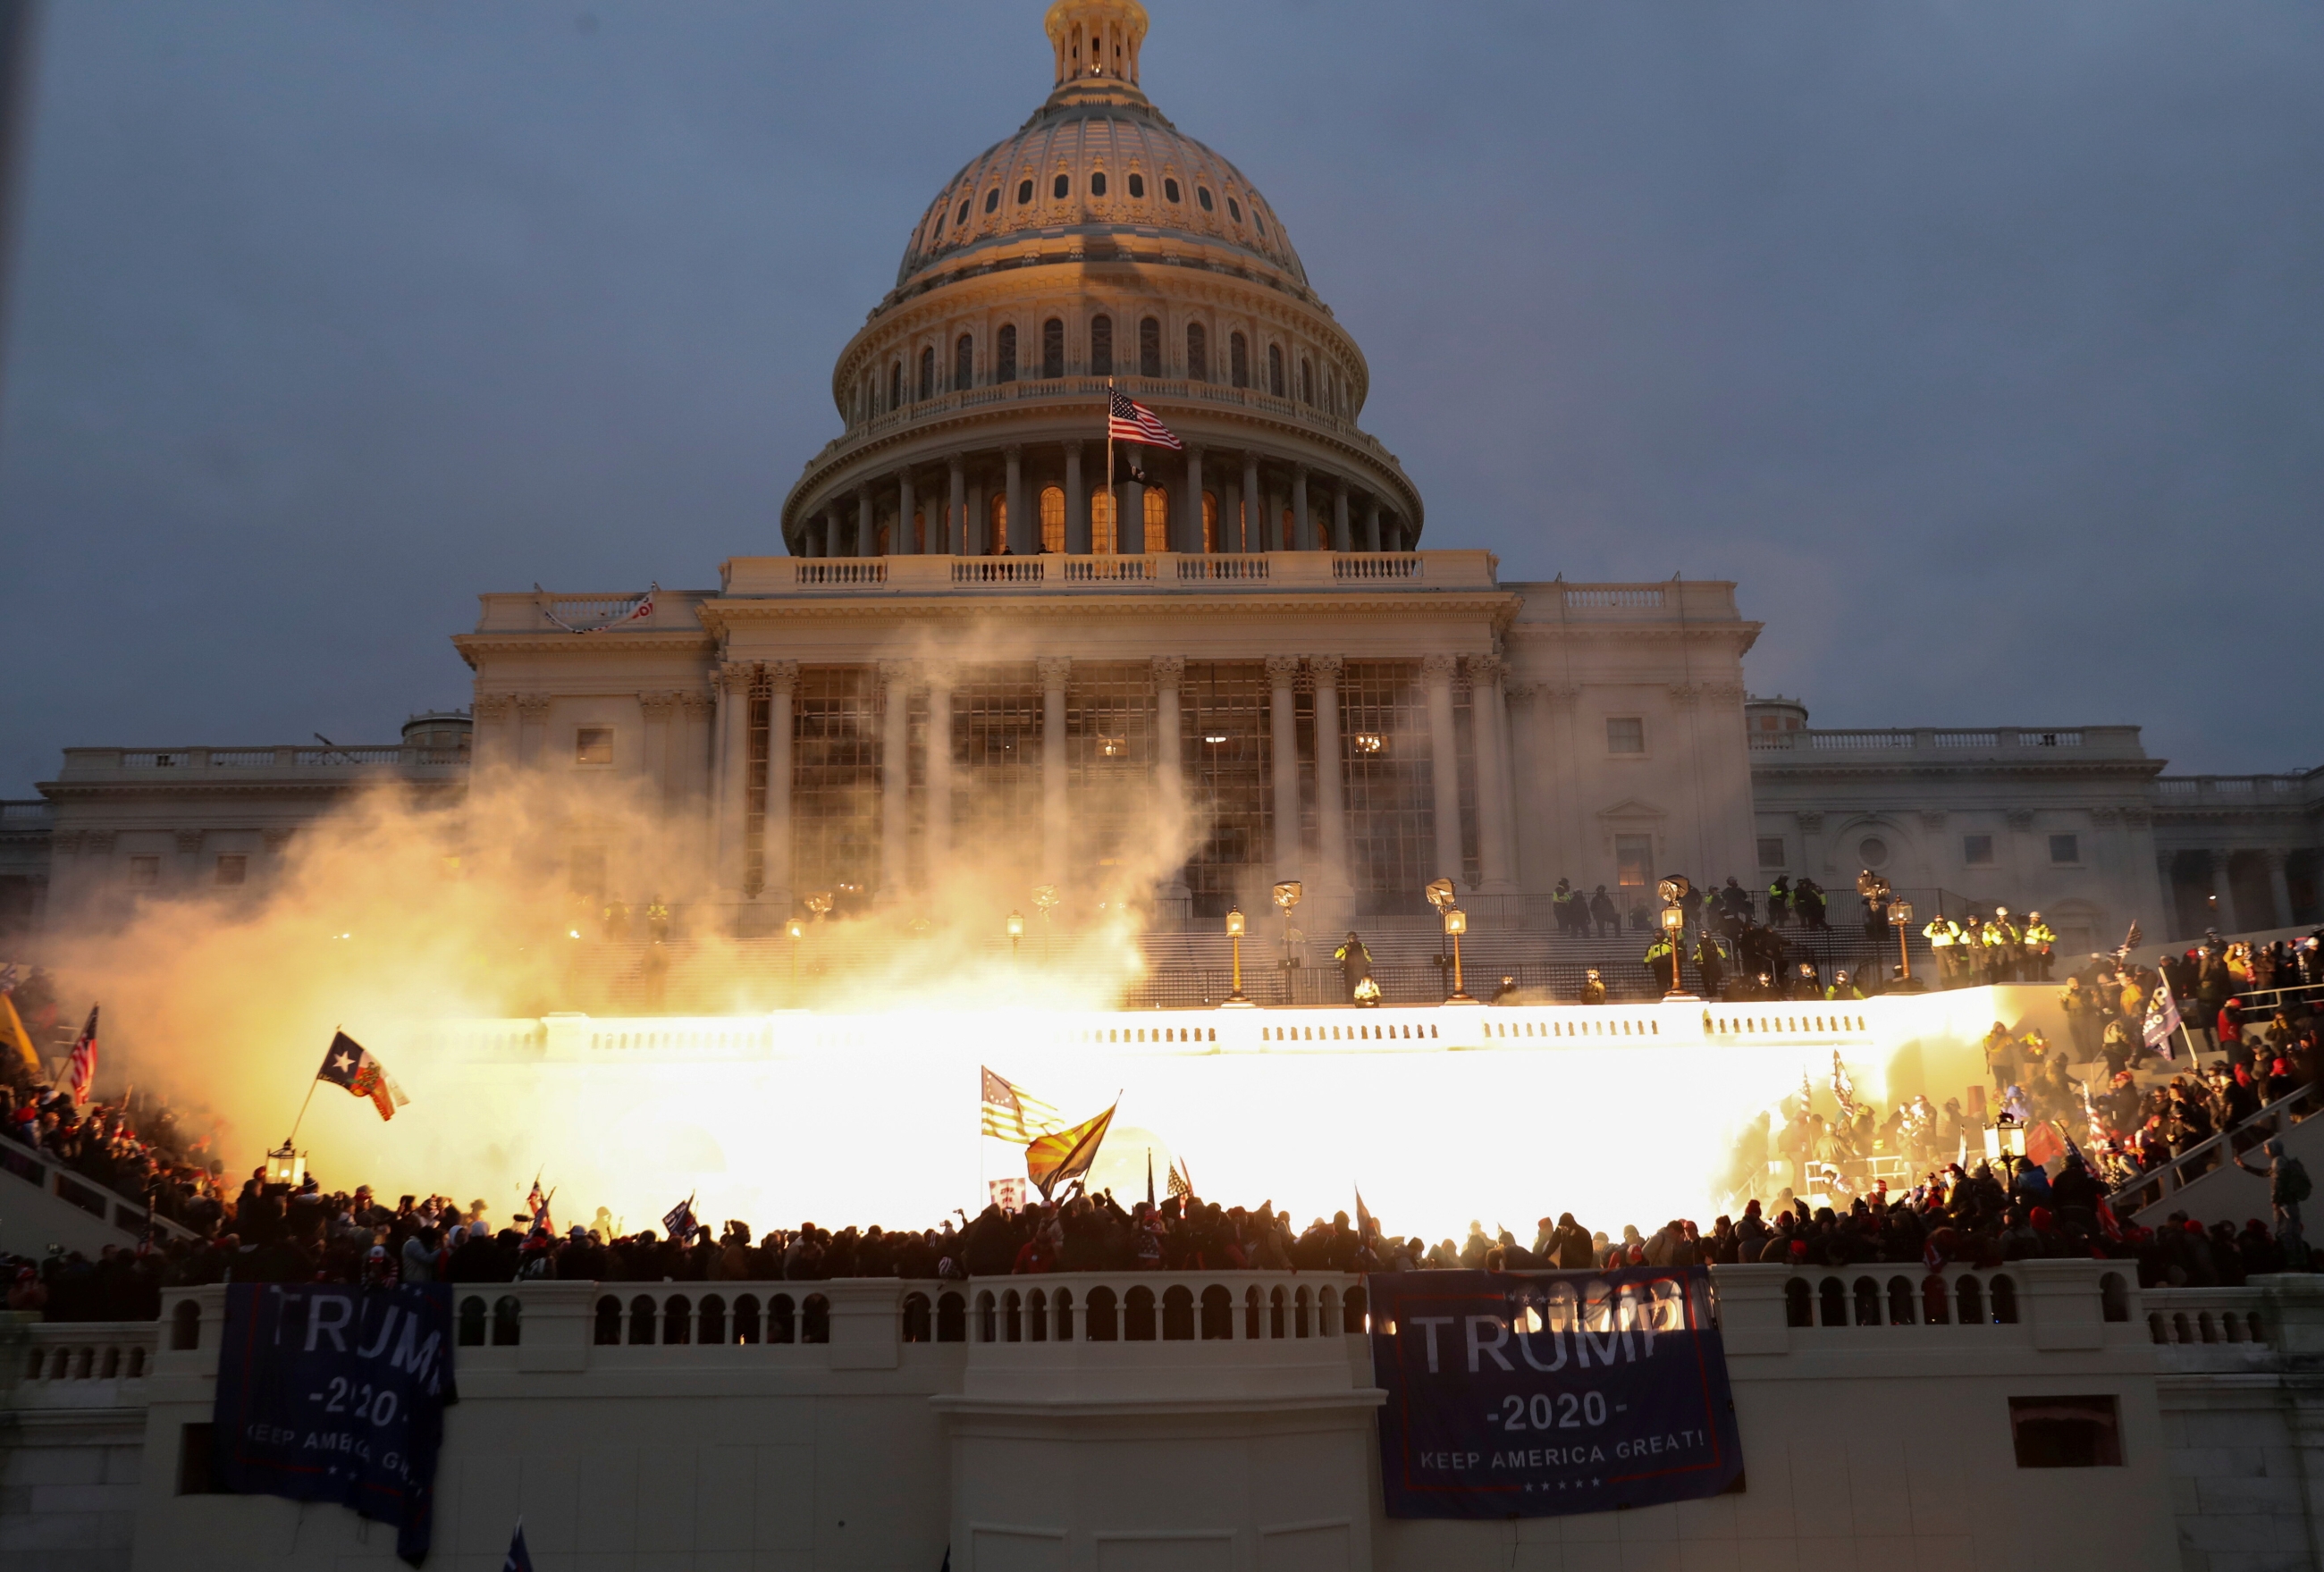 Supporters of President Donald Trump gathered in front of the US Capitol Building in Washington on Wednesday, with some forcing their way into the building (Reuters)